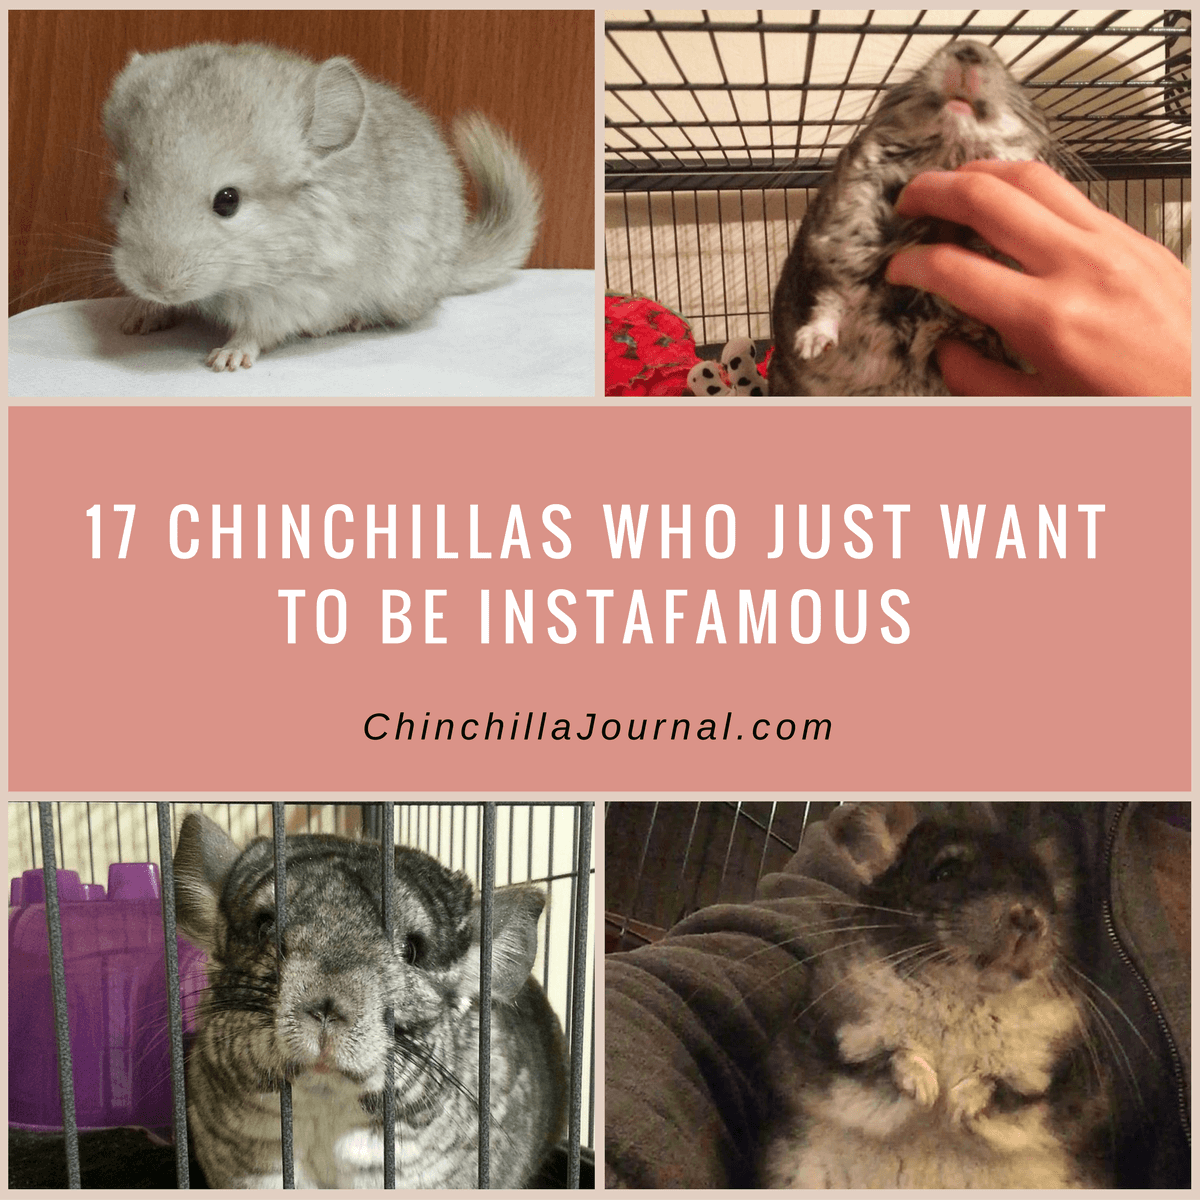 17 Chinchillas Who Just Want To Be Instafamous